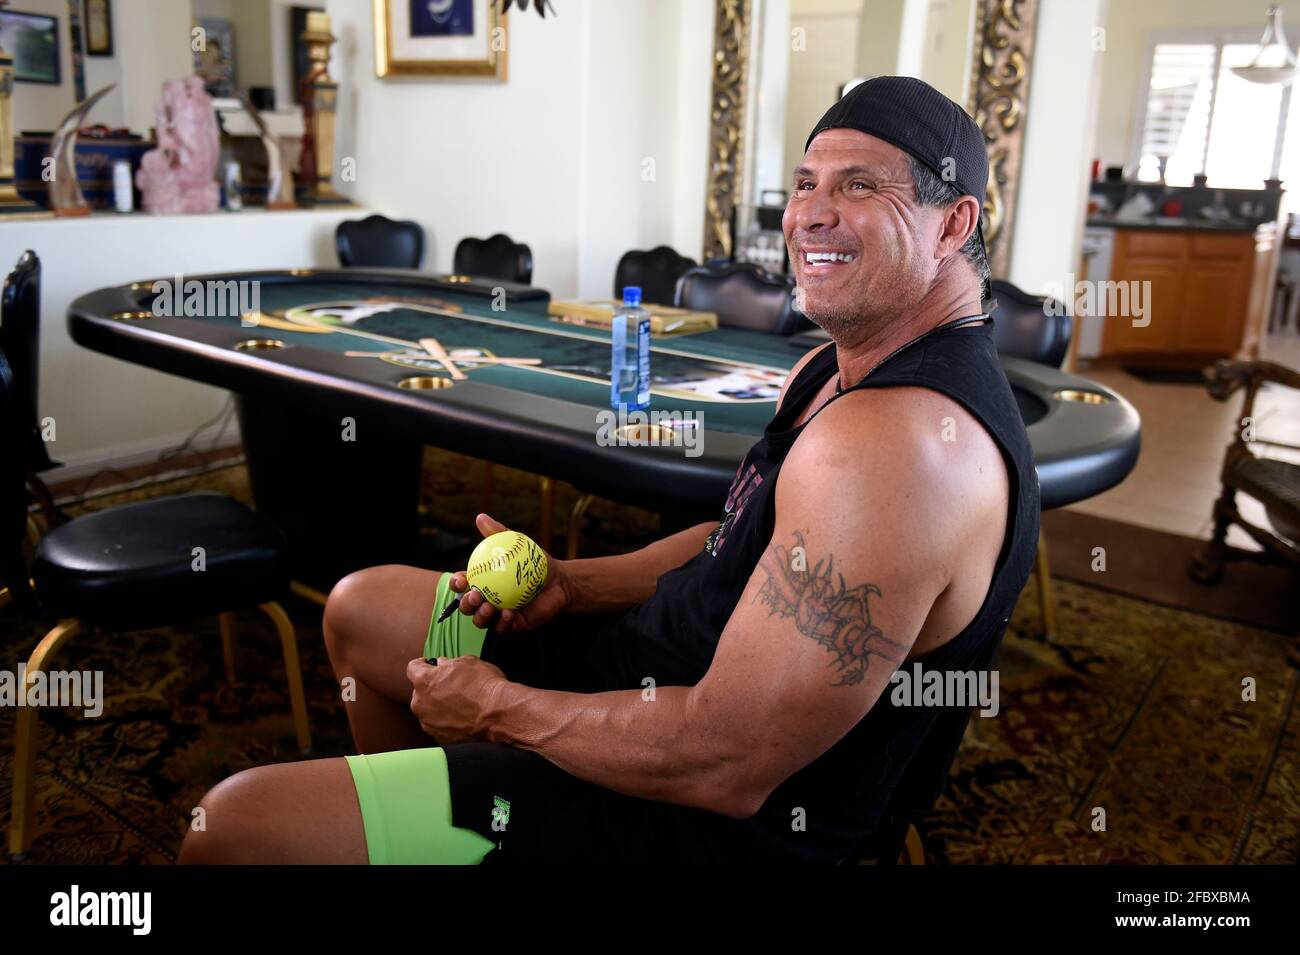 Jose Canseco Old School vs. New School Poker Event Charity, held at the  Mirage Hotel and Casino Las Vegas, Nevada - 11.08.07 Stock Photo - Alamy